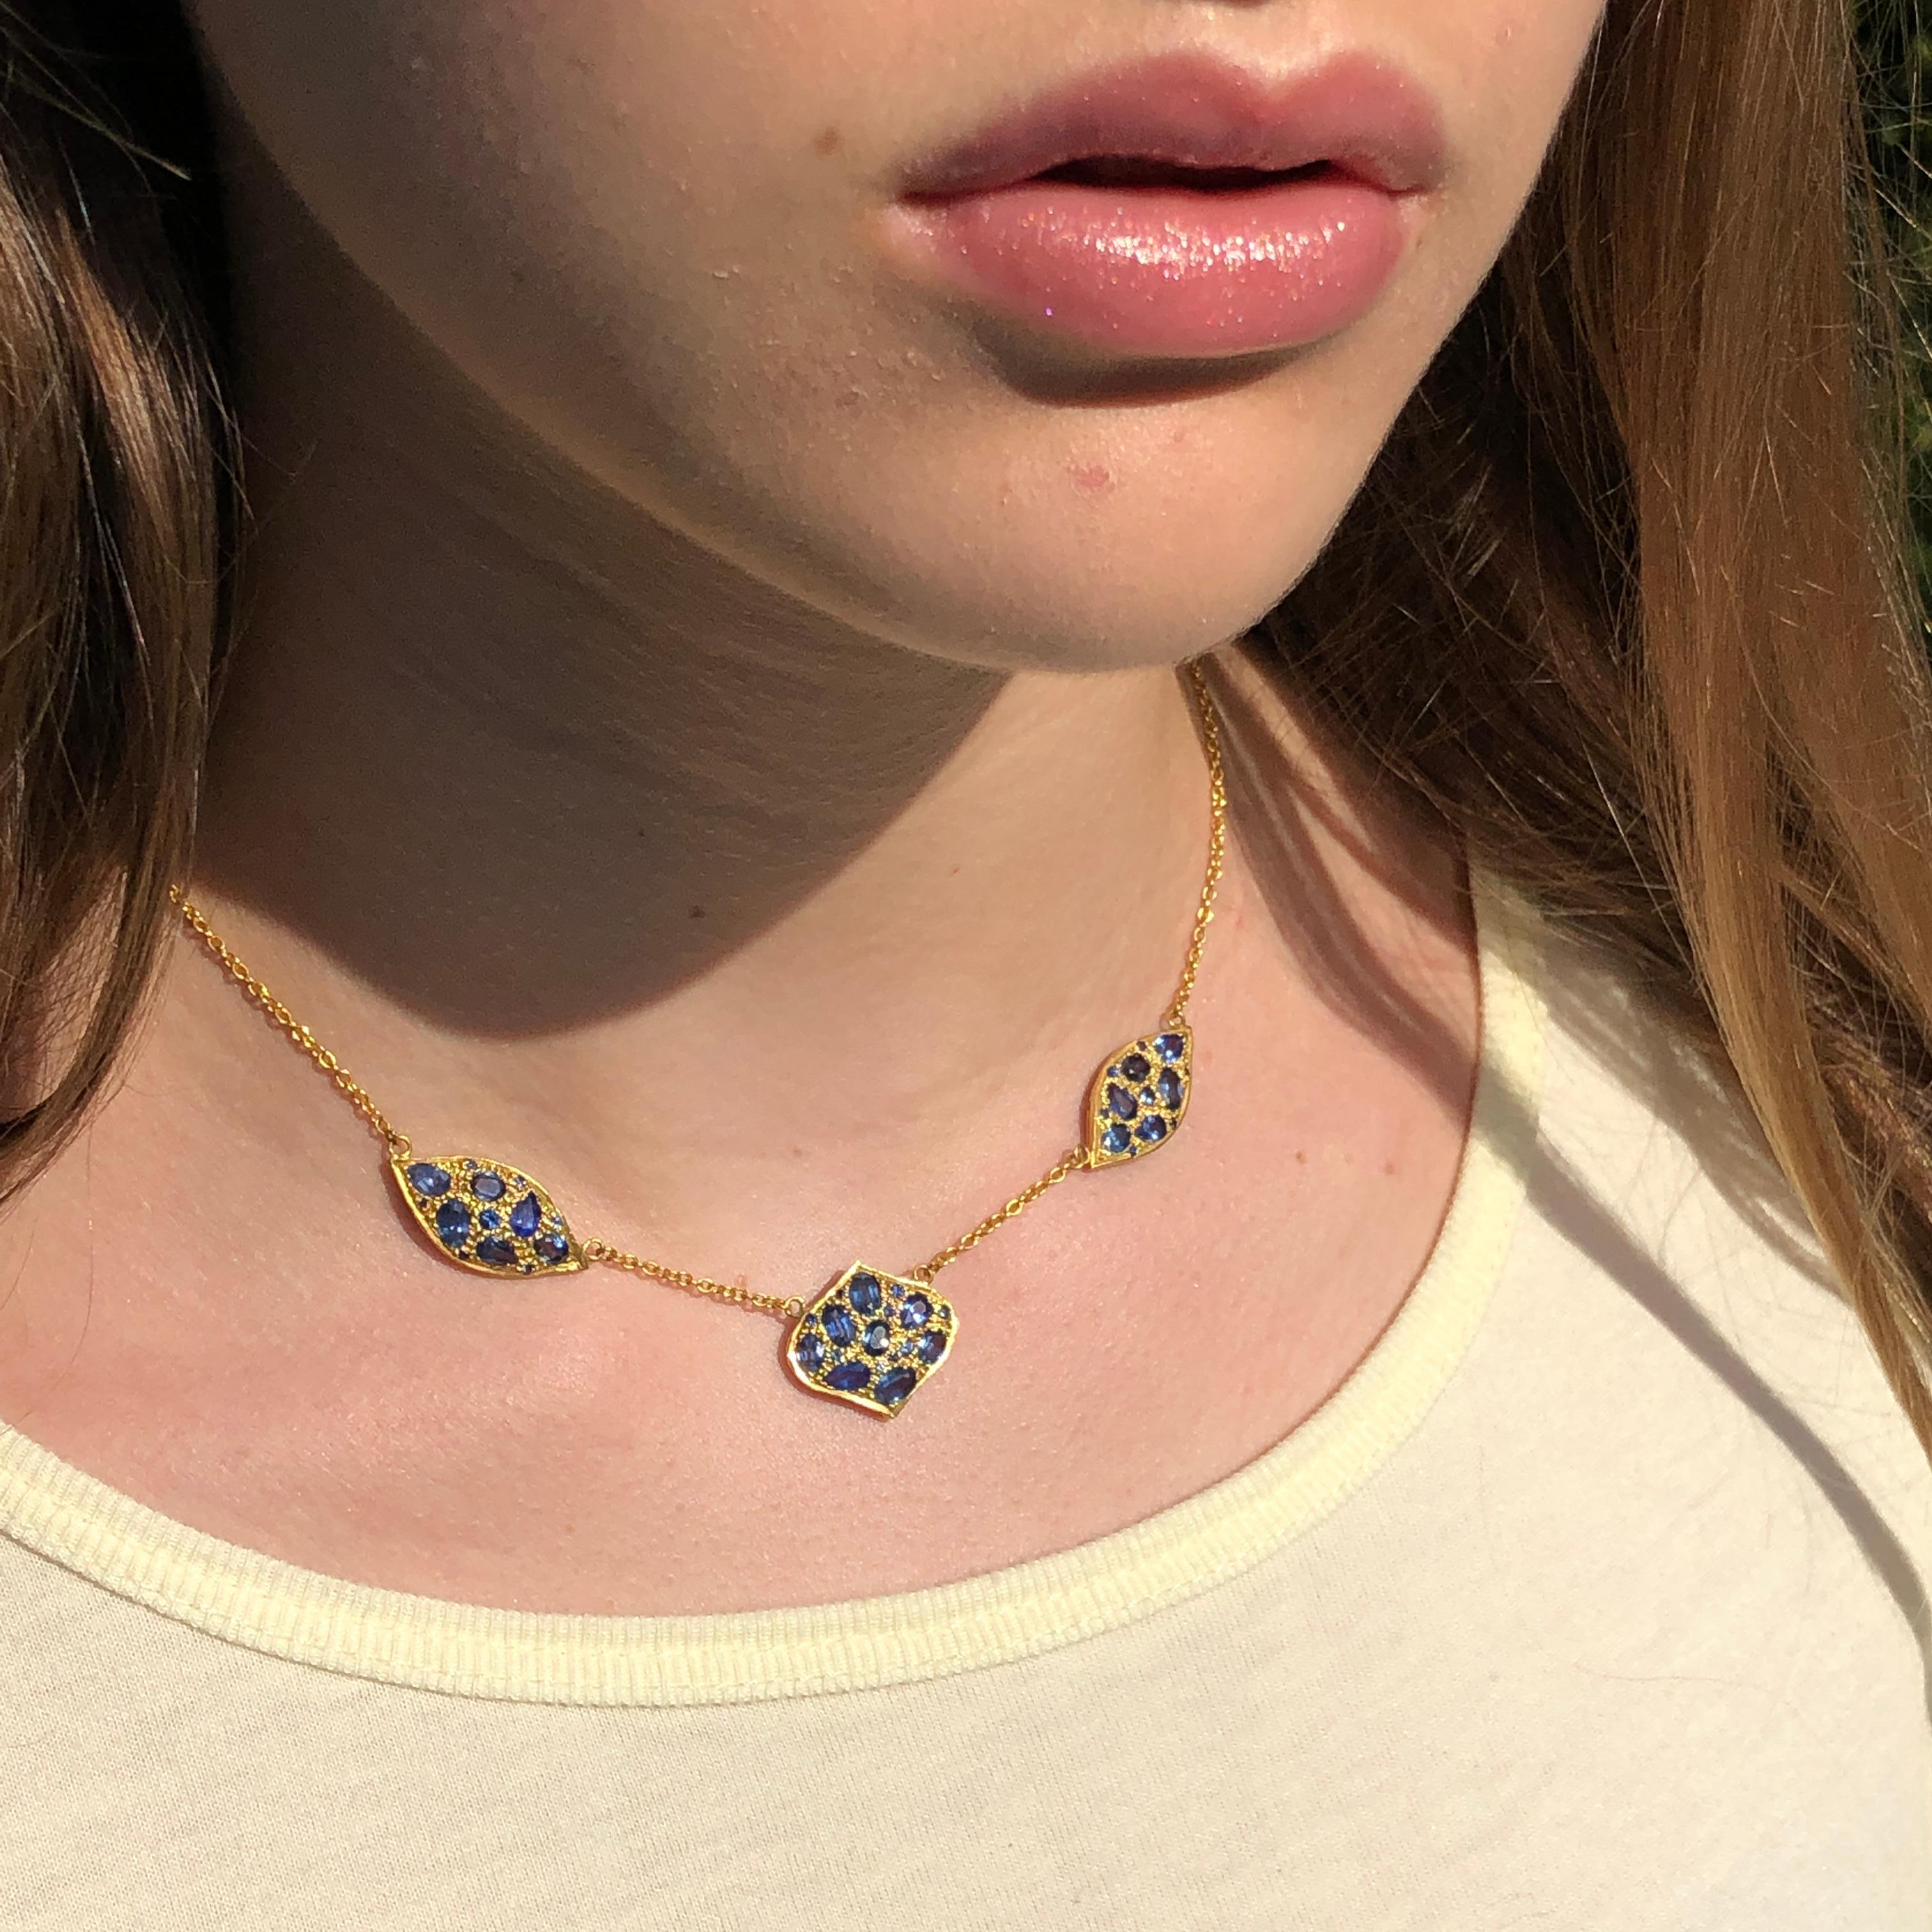 Lauren Harper Collection necklace with Blue Sapphires, delicately set in an 18kt Yellow Gold grain setting on an 18kt Gold chain.  Total length 16.25 inches, but can be adjusted shorter by .75 inches.  Necklace sits right at the nape of the neck,